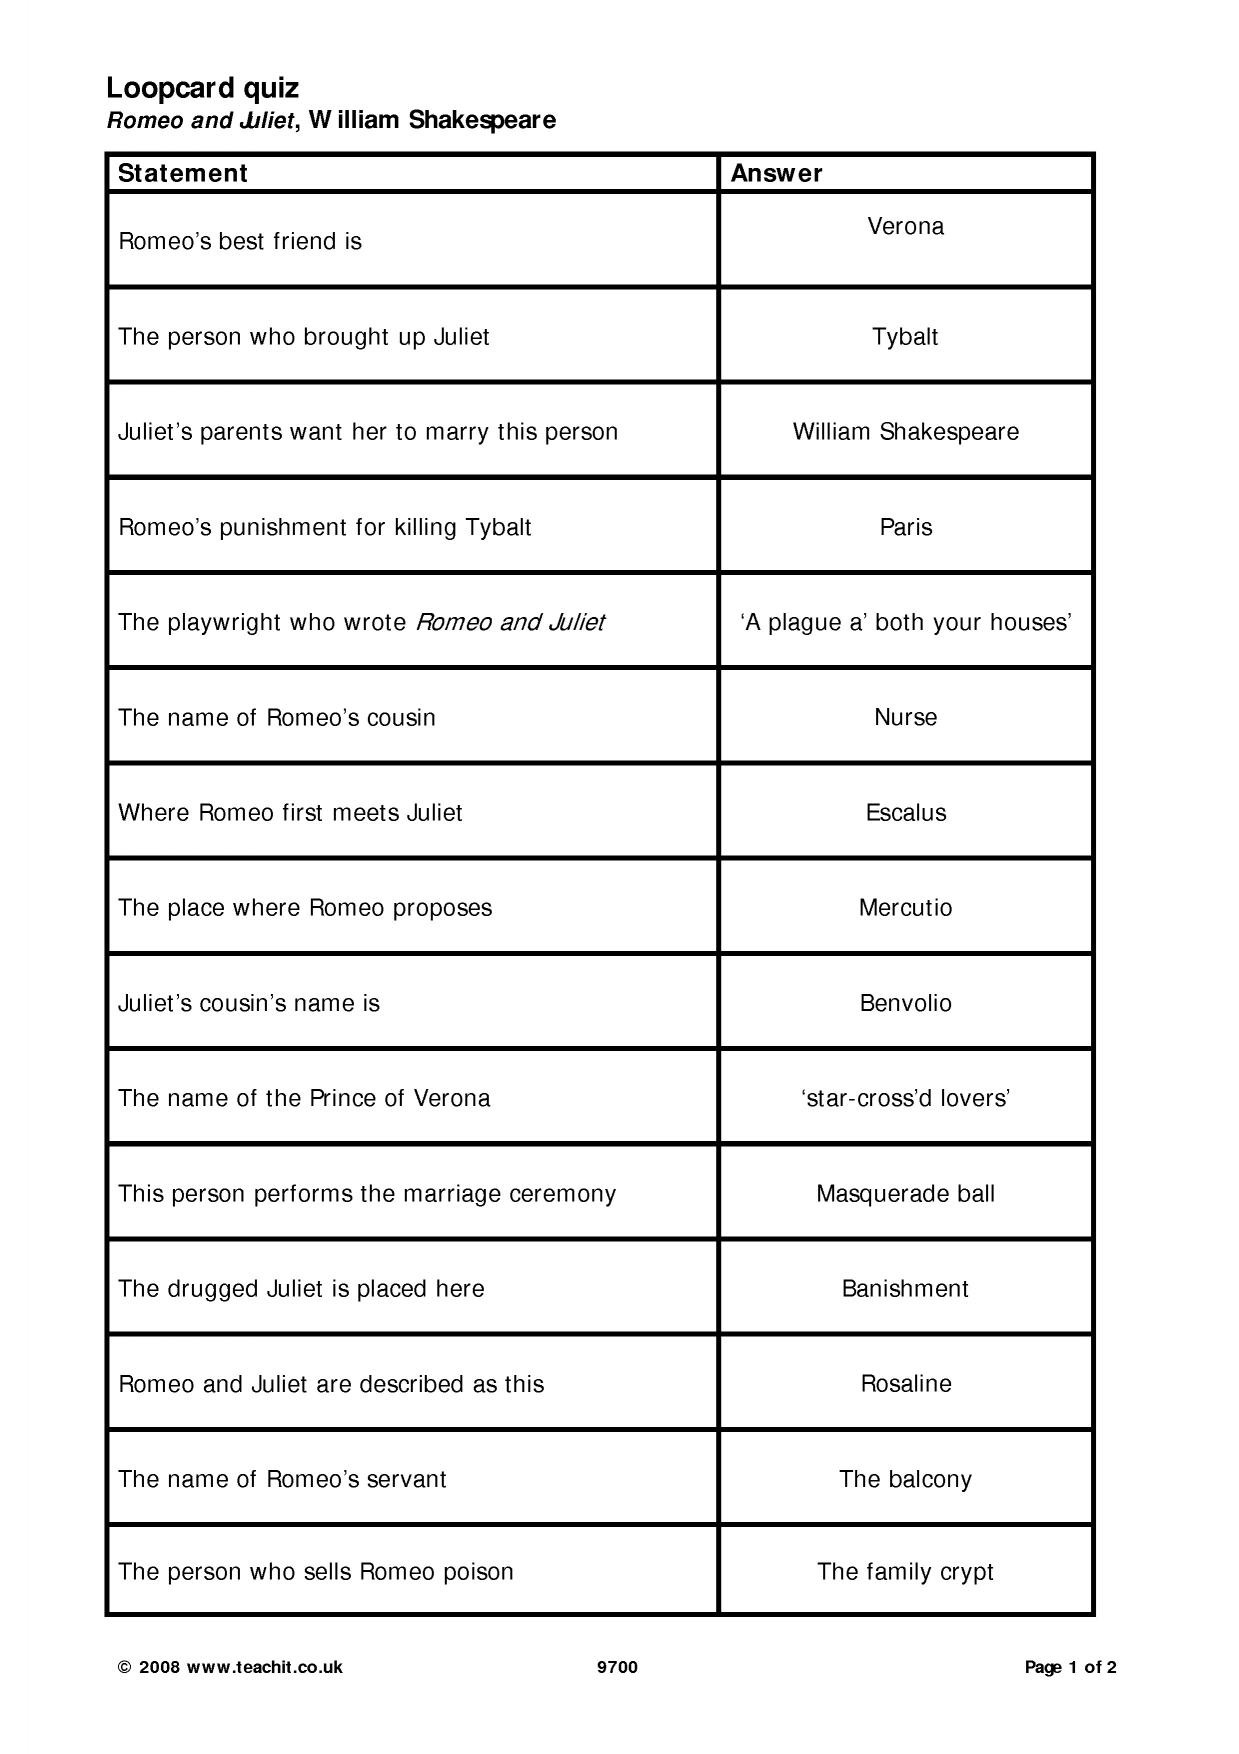 Romeo And Juliet Prologue Worksheet Db excel